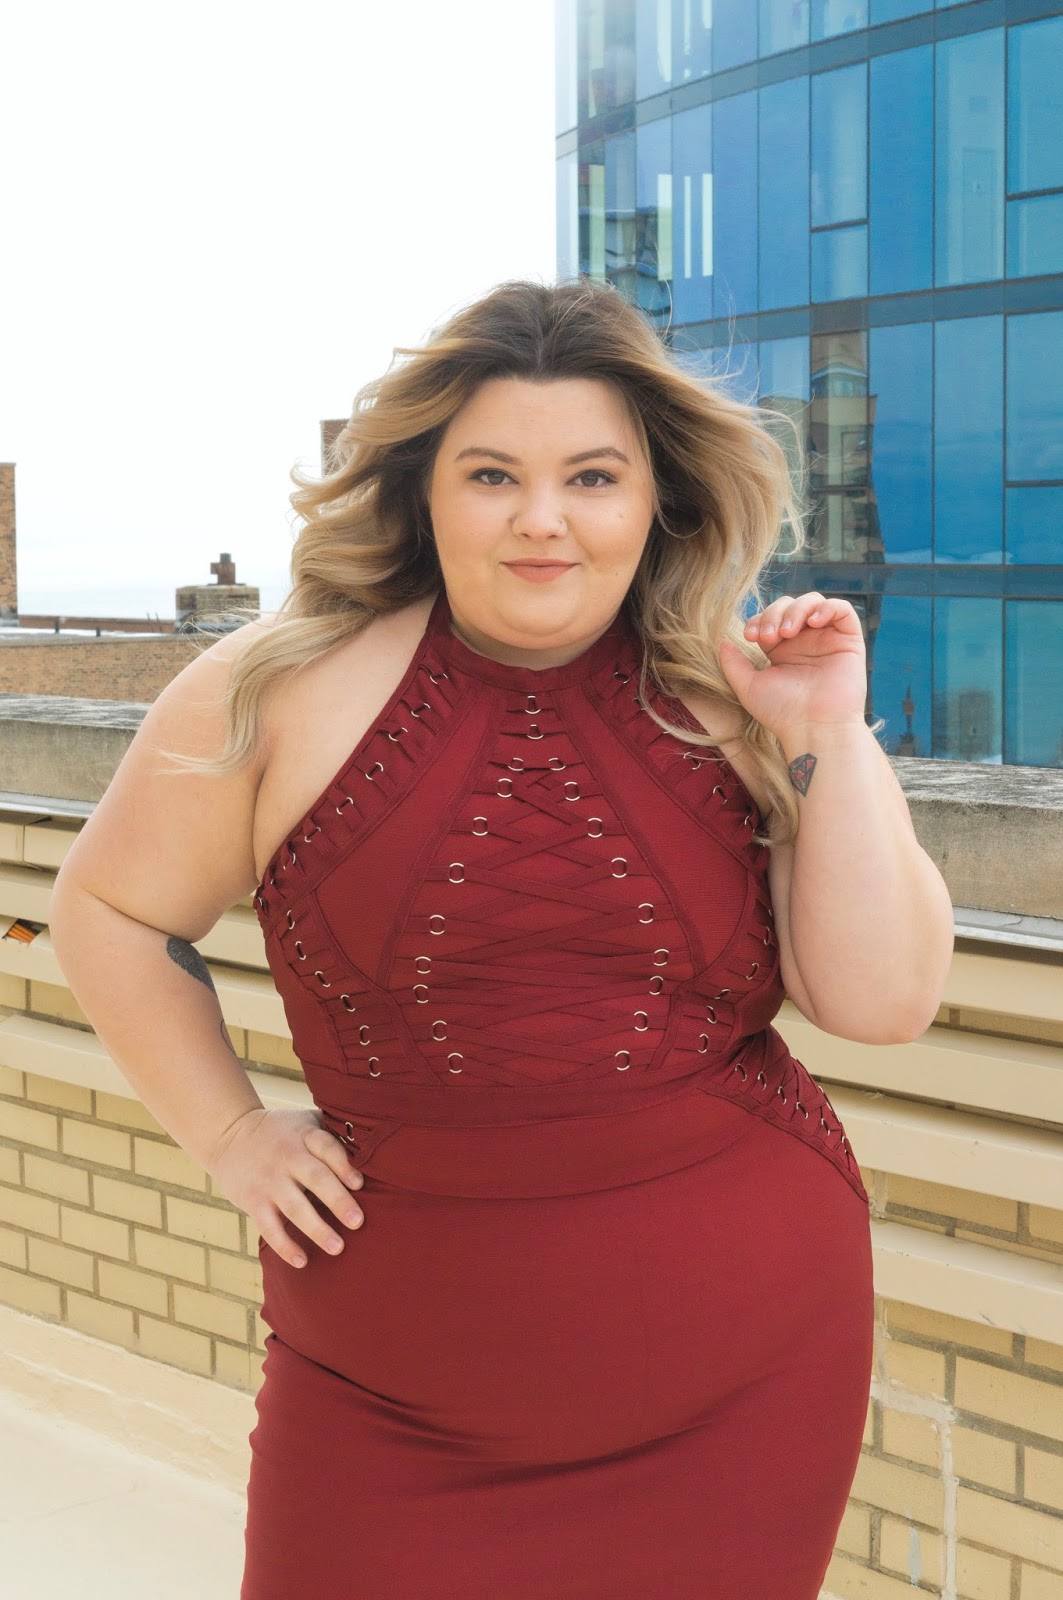 natalie craig, natalie in the city, Chicago plus size fashion blogger, fashion blogger, outfit review, fashion nova, fashion nova curve, Chicago plus size model, plus size body con dress, plus size bandage dress, lace up trend, affordable plus size fashion, off your beauty standards, embrace my curves, plus model mag, skorch magazine